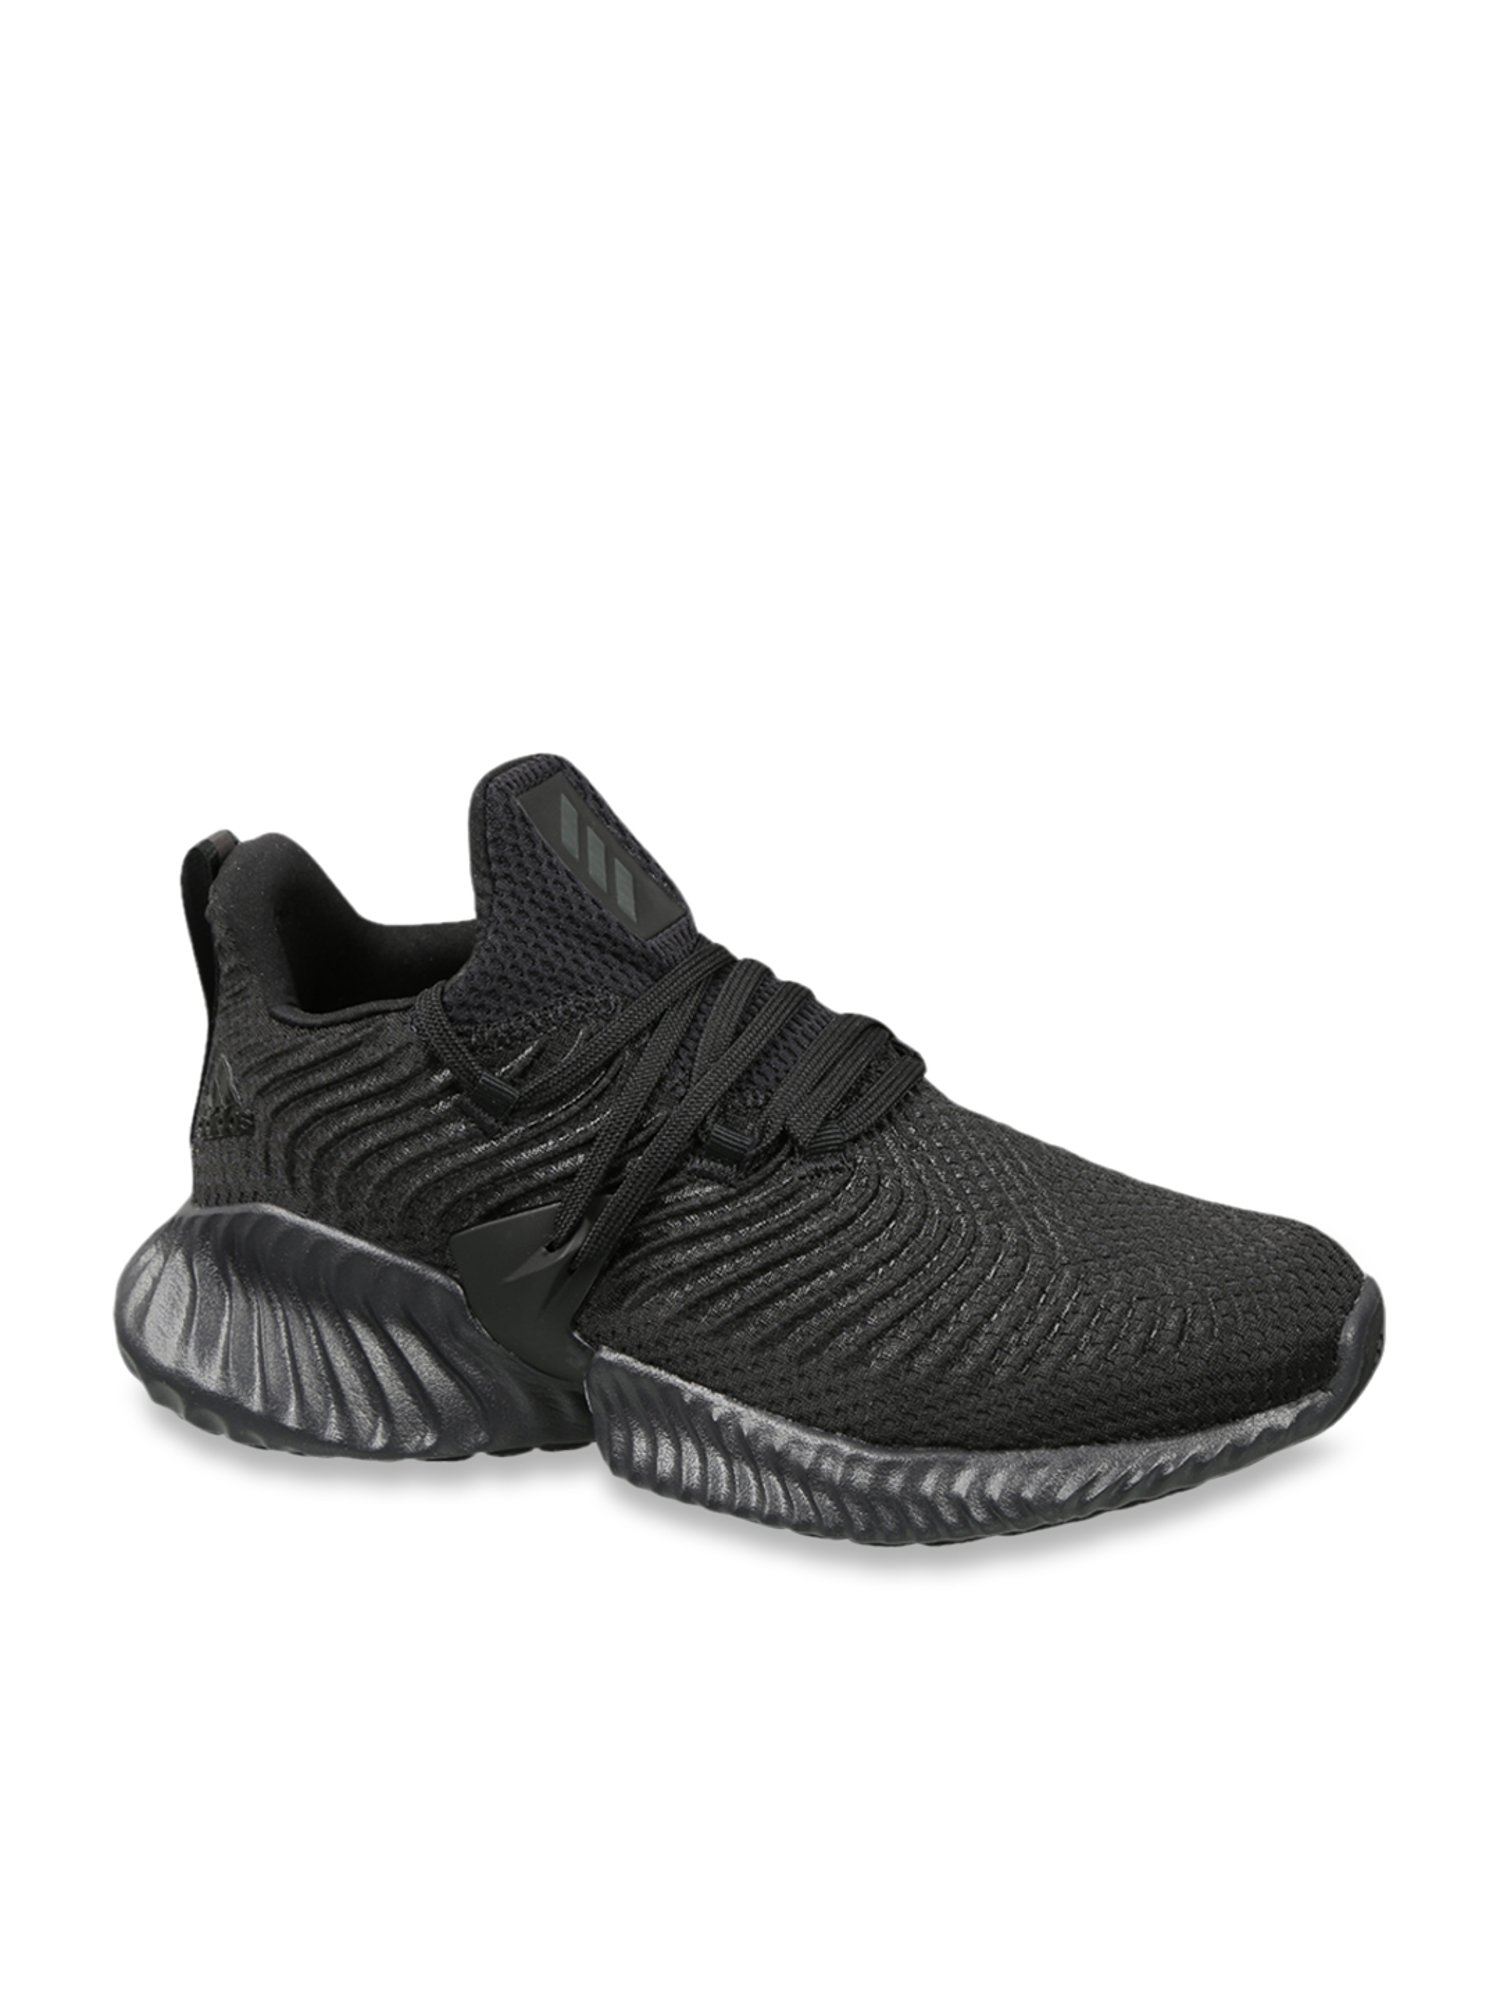 Adidas OEM Unisex Running shoes Women and Men Shoes Rubber shoes  Comfortable Fashion Alpha Bounce | Shopee Philippines